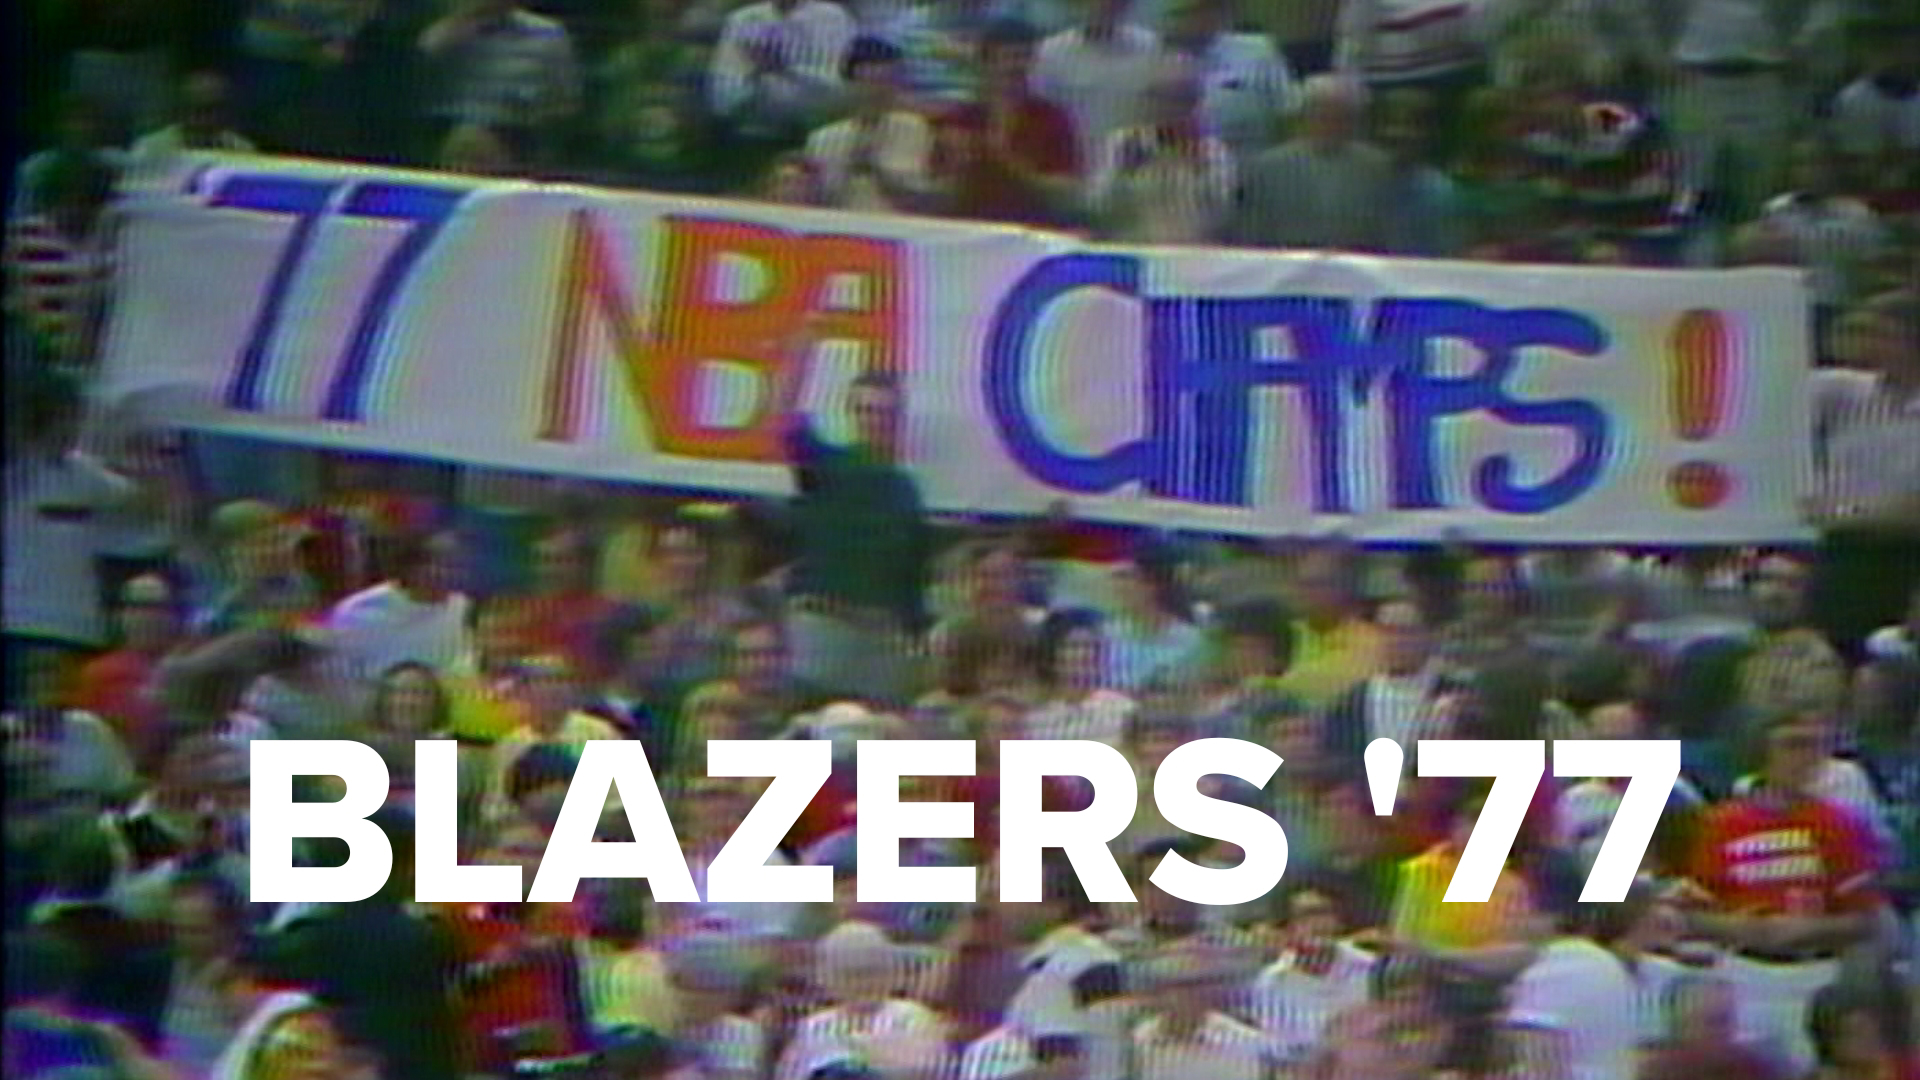 ARCHIVE: raw game film, post-game and news stories from the 1977 Trail Blazers championship game, rally and parade in Portland